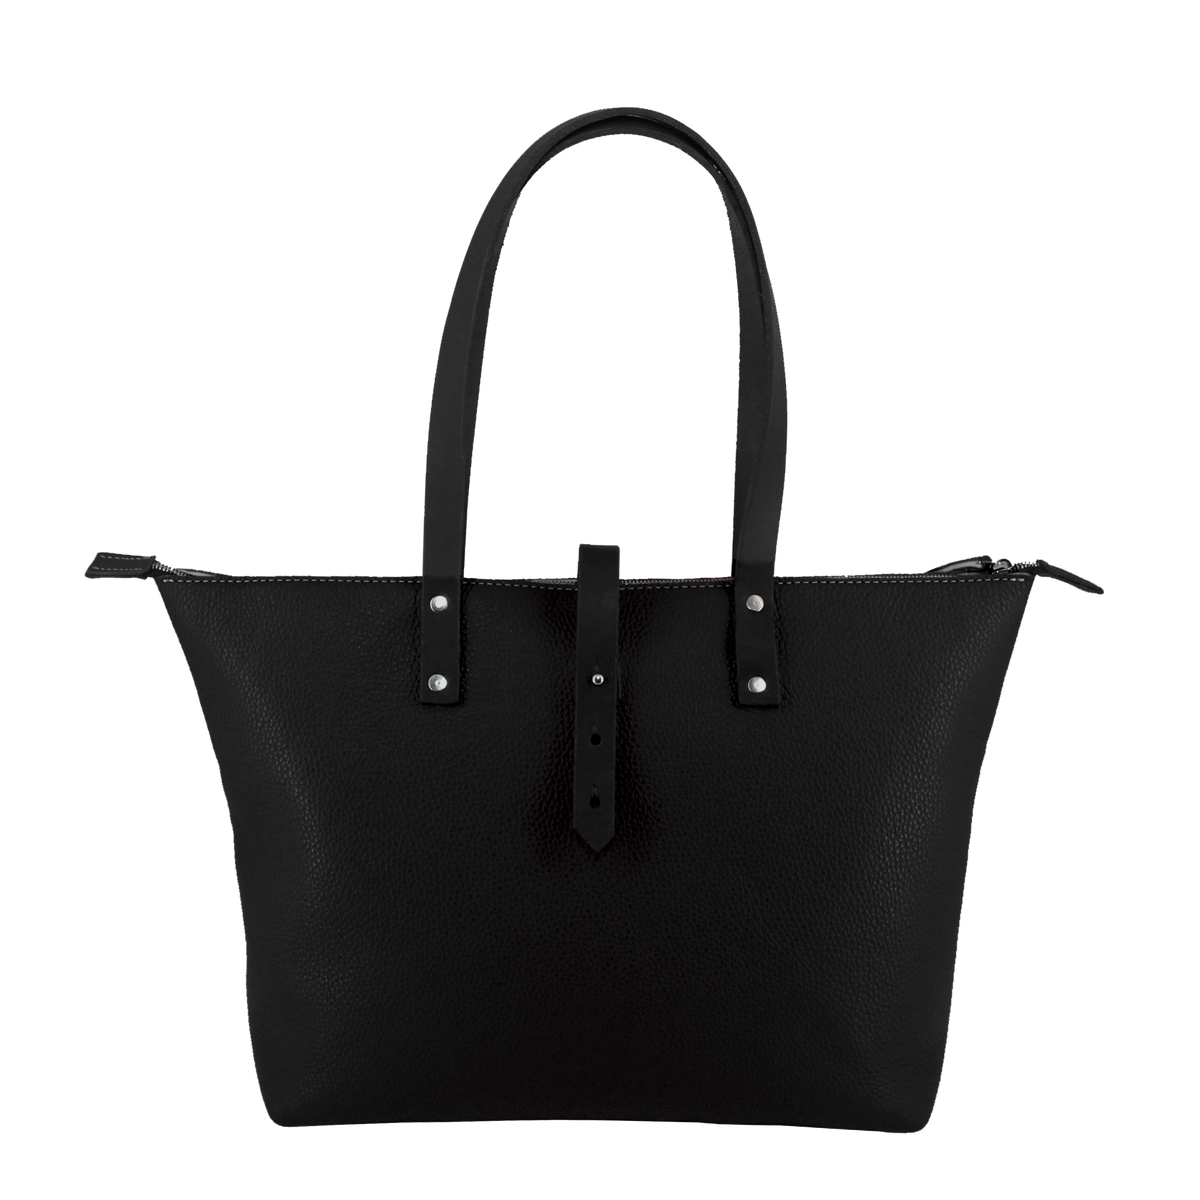 Italian Leather Tote with Wool Felt and Zip - Black and Black - RYAN London